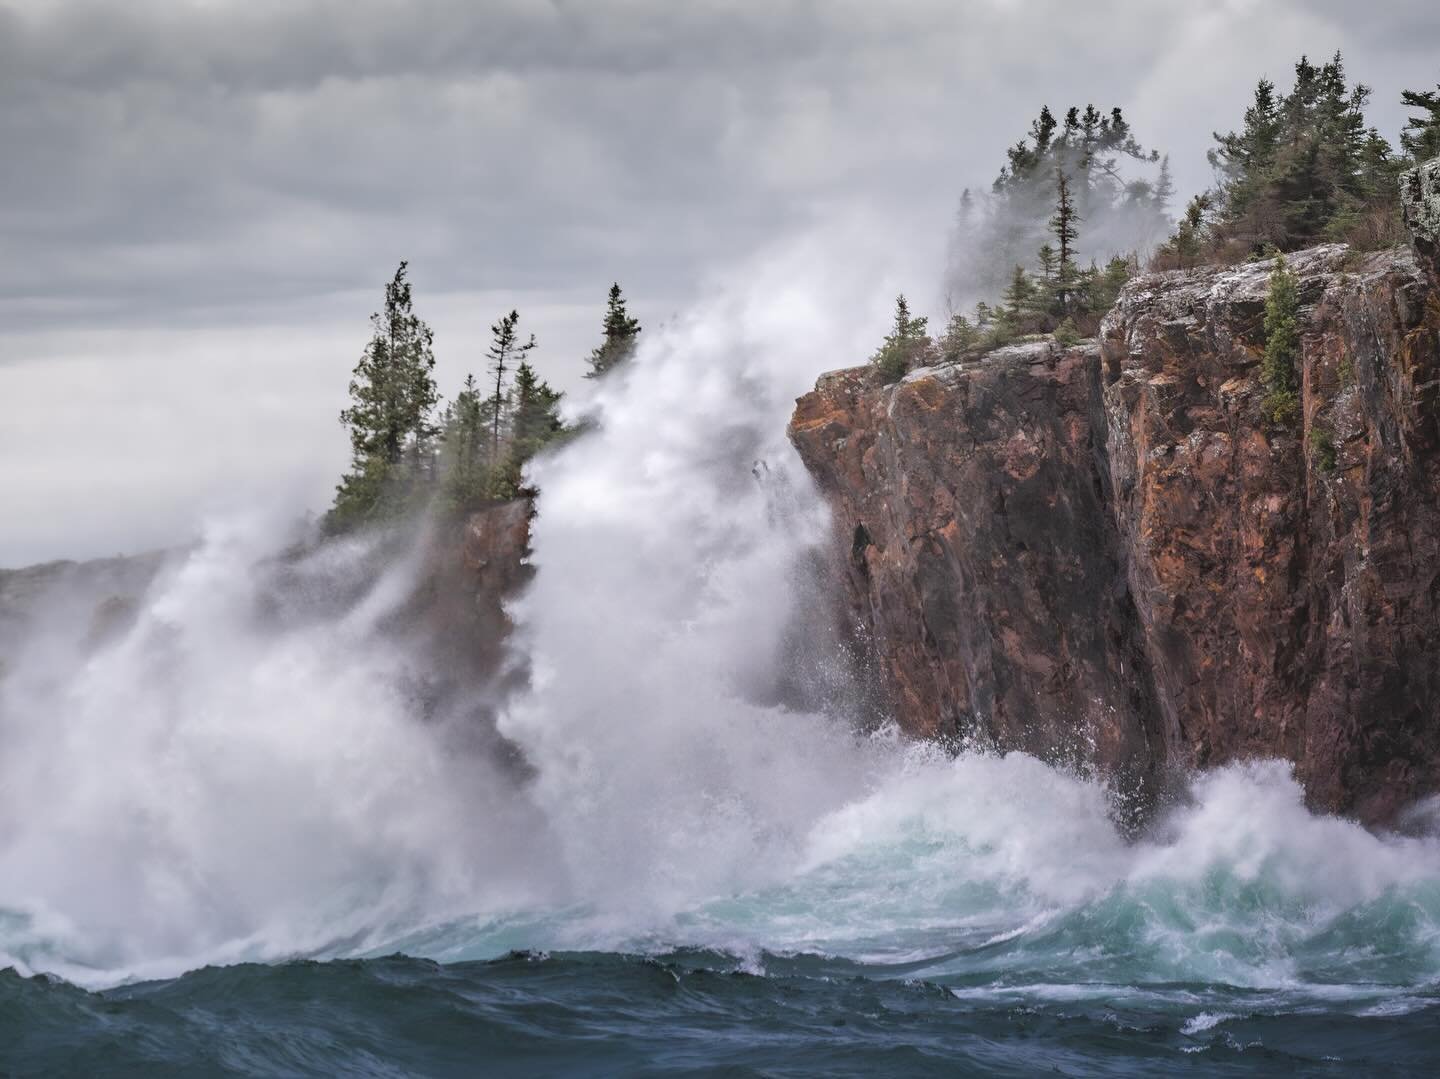 A lake becomes an ocean&hellip;

50 mph winds brought the waves to Lake Superior on a brisk Spring day. 

I&rsquo;ve never seen the Lake like this, nor have I ever tried shooting on a day quite like this one. It was wonderfully slippery, wet and gust